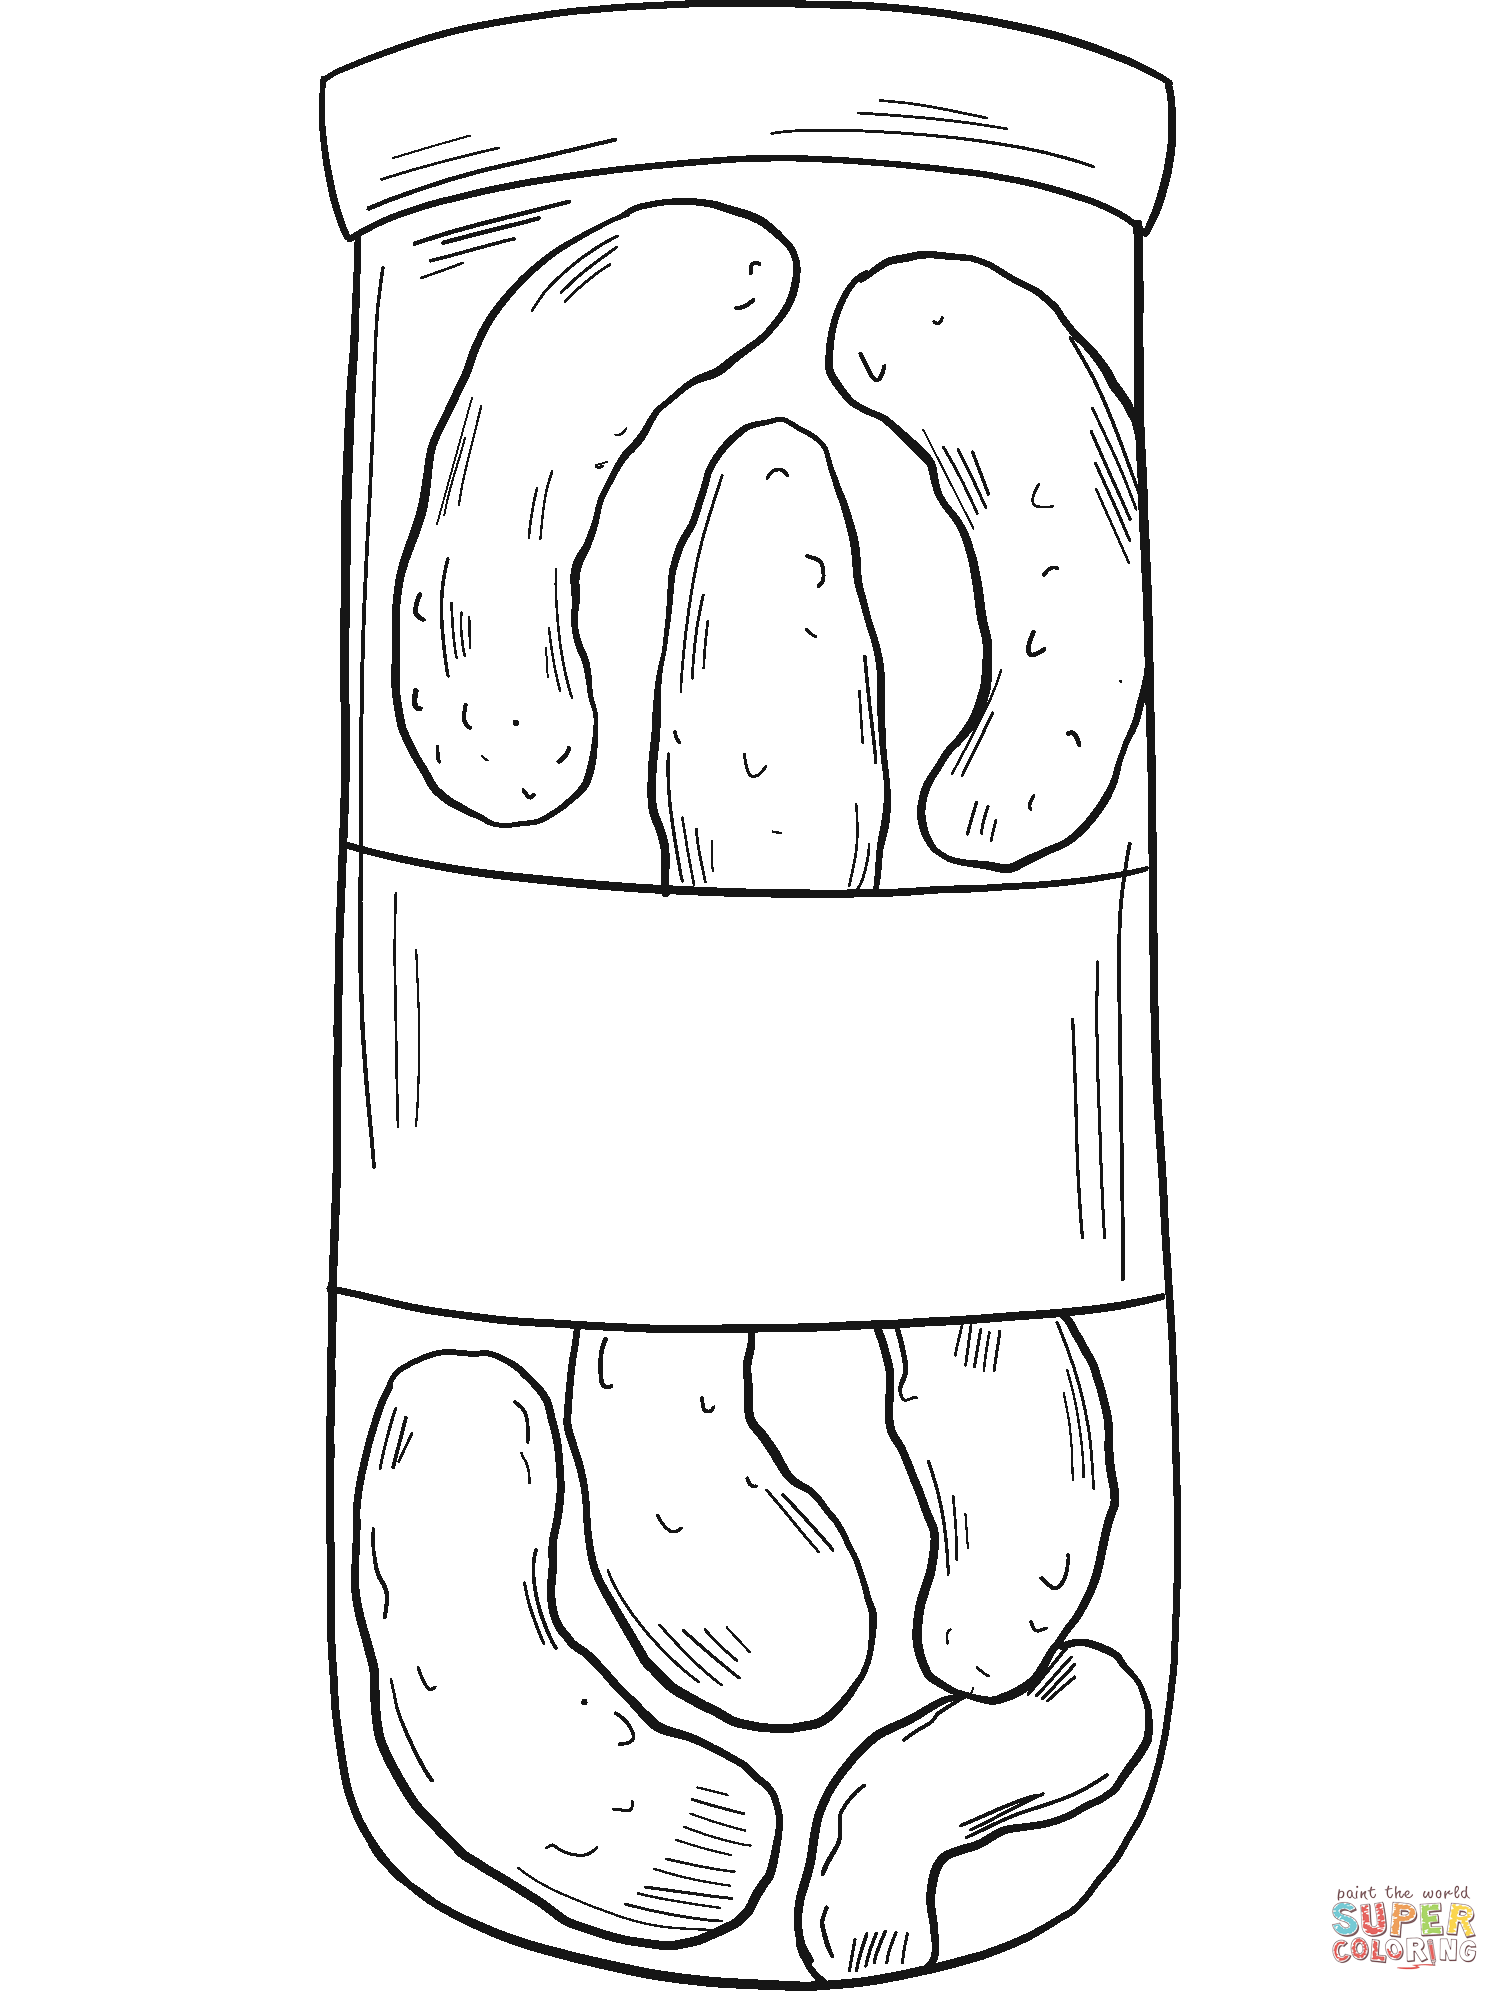 Canned Pickles coloring page | Free Printable Coloring Pages